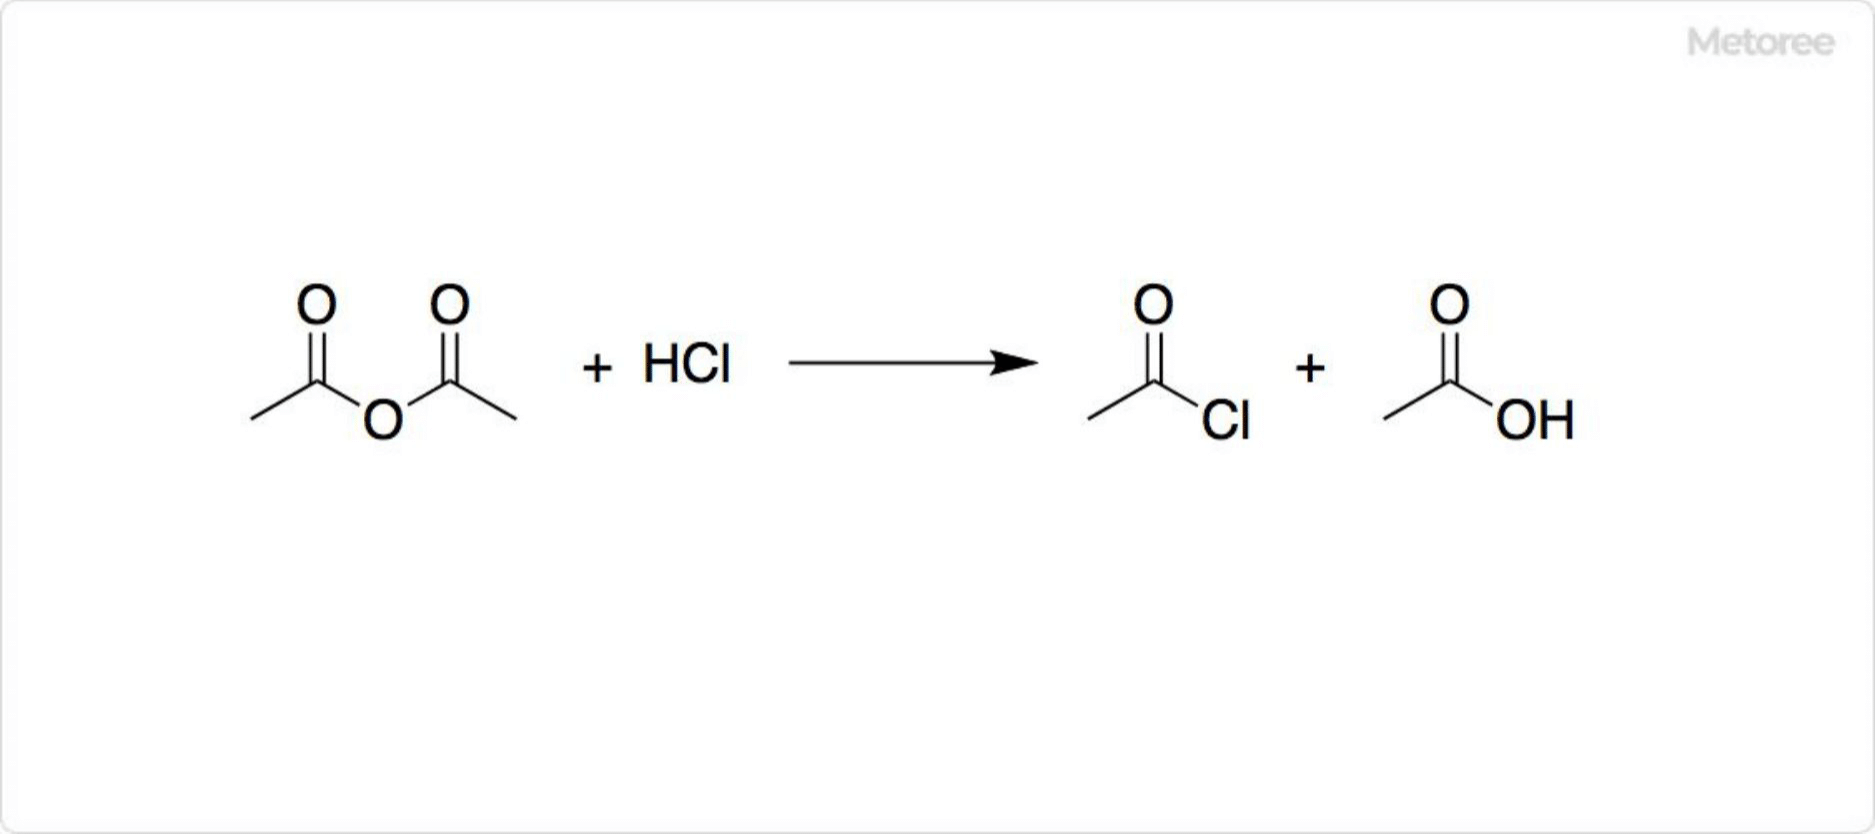 Figure 2. Synthesis of Acetyl Chloride